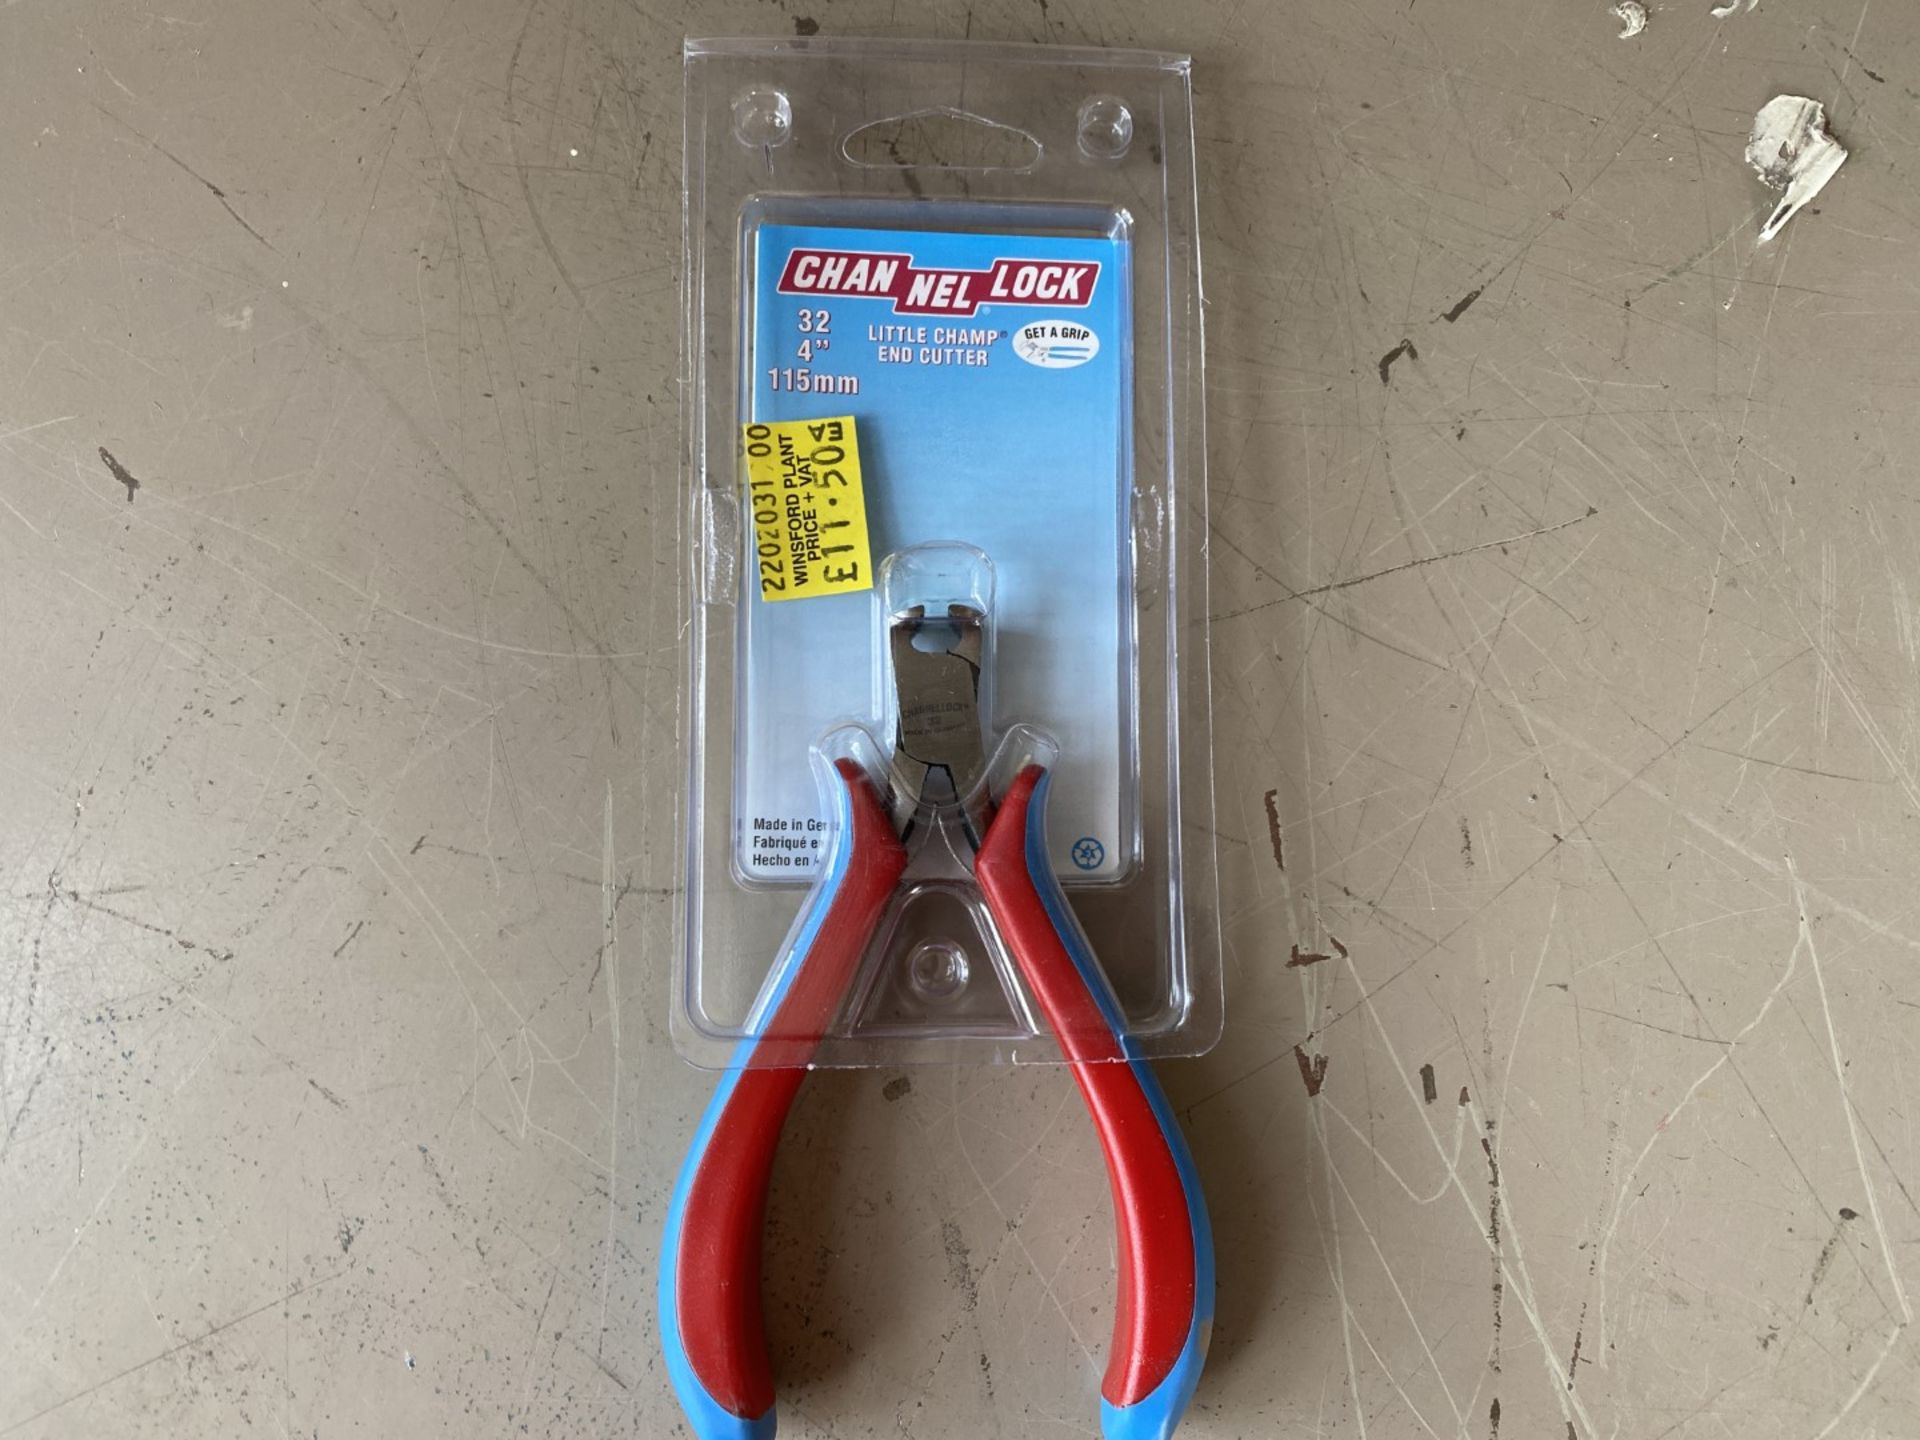 NEW Chan-nel Lock little champ end cutter, RRP £11.50